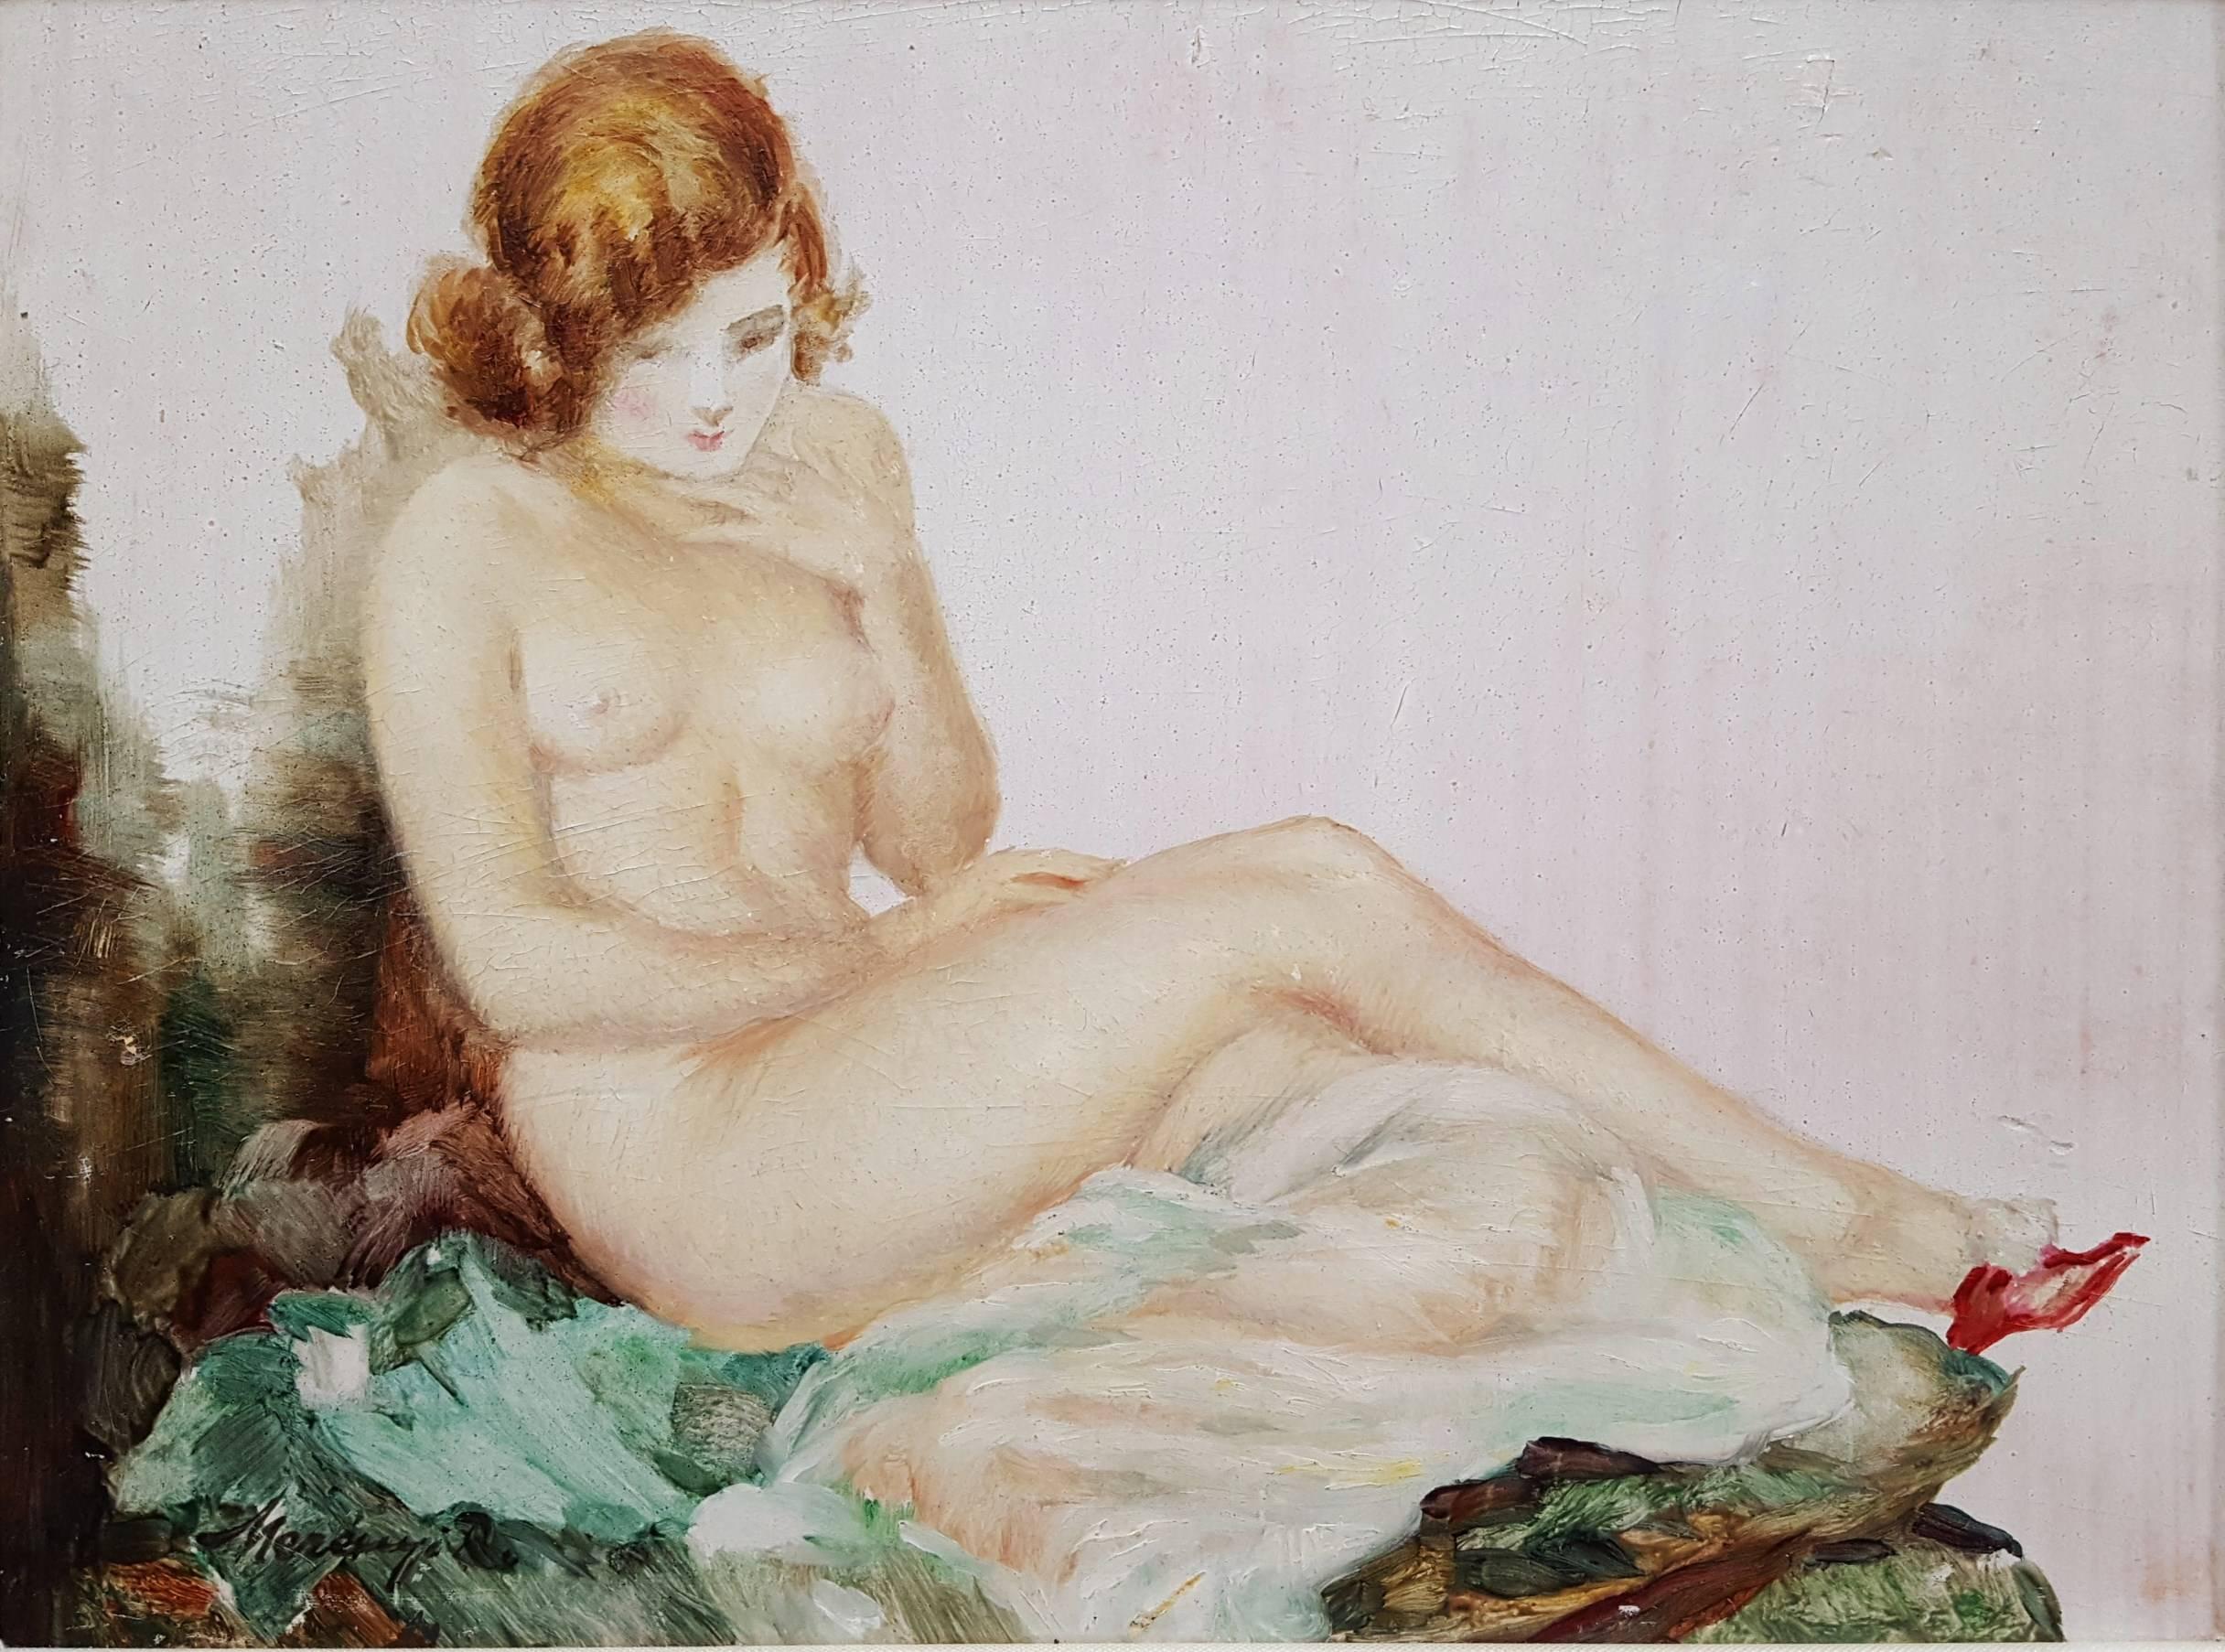 Rezsoe Merenyi Nude Painting - Reclining Nude /// Antique Figurative Woman Lady Oil Painting Hungarian European